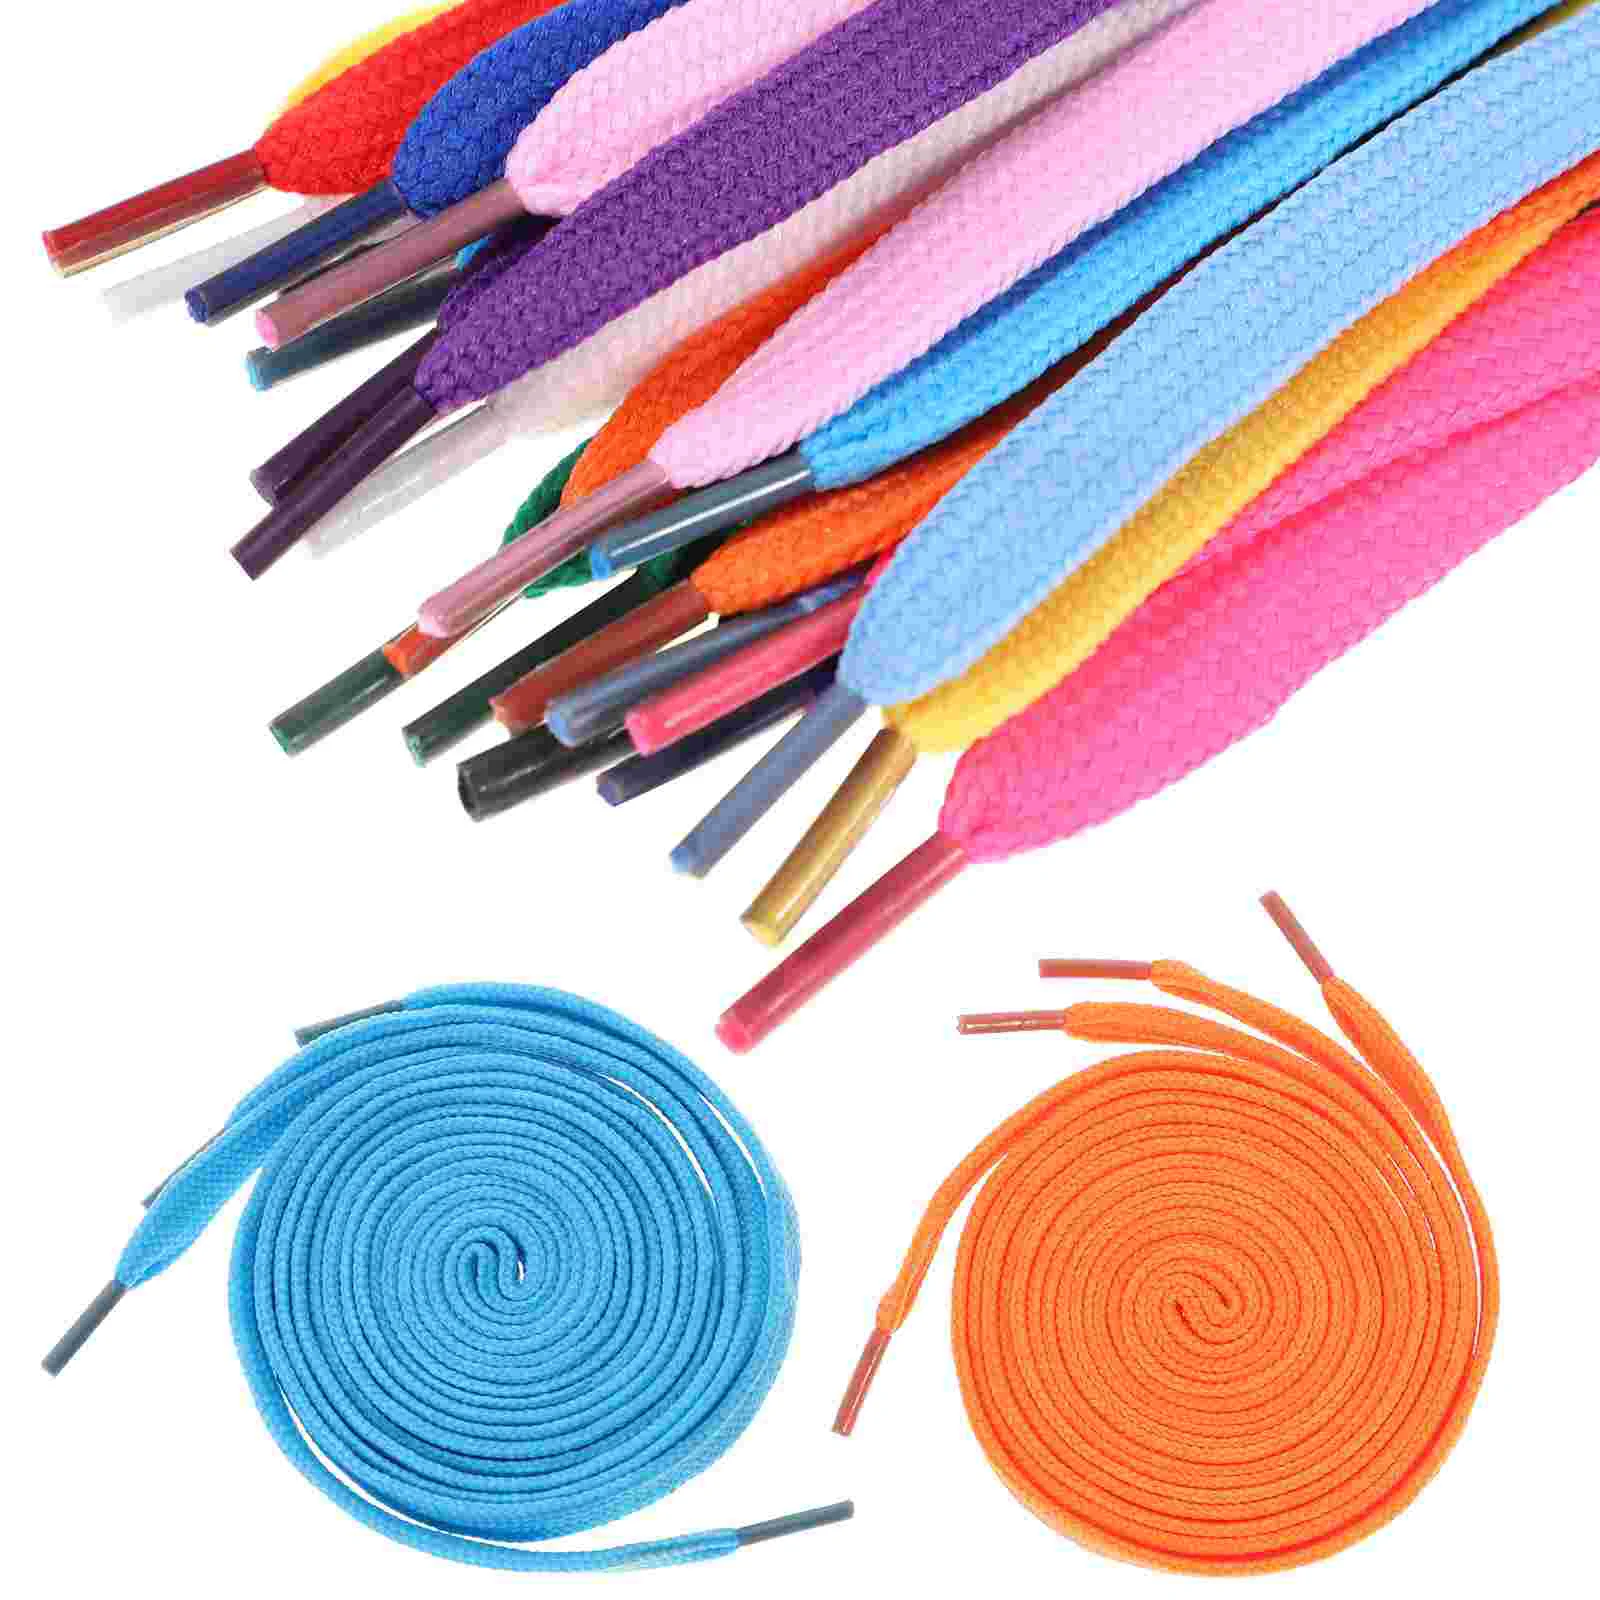 of Replacement Flat Shoelaces Shoe Laces Strings for Sports Shoes /Boots /Sneakers /Skates (Assorted Colors) fashion no tie shoe laces elastic laces sneakers flat shoelaces without ties kids adult quick shoe lace rubber bands for shoes